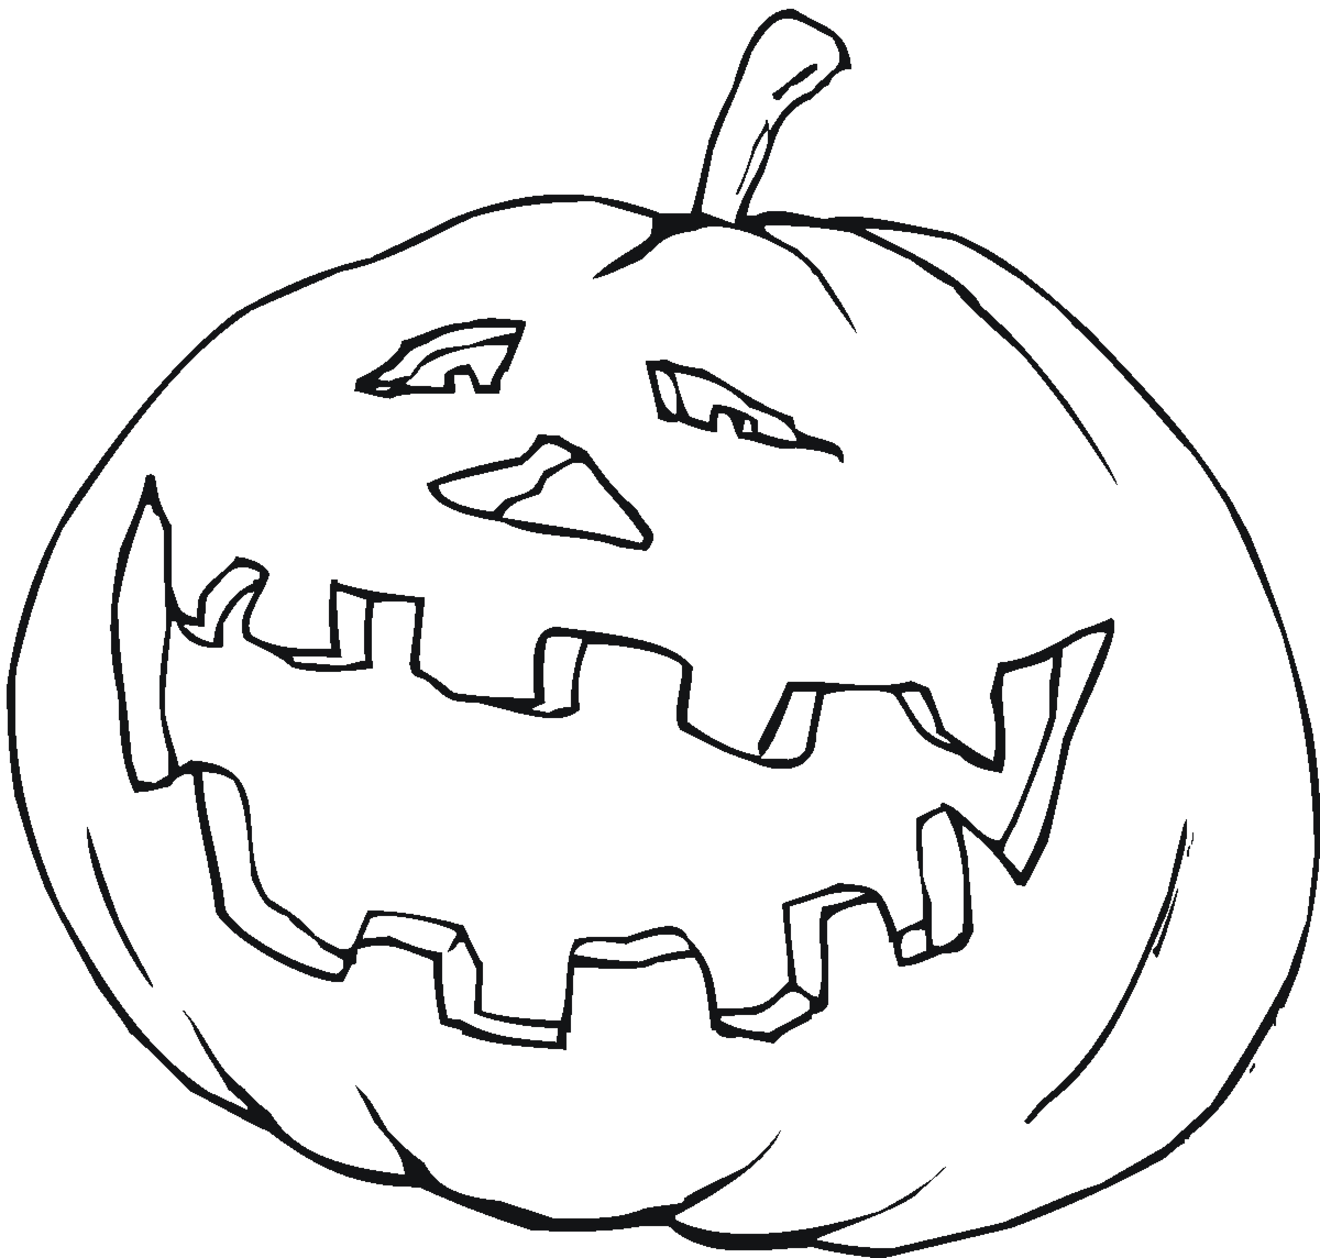 Coloring page: Pumpkin (Objects) #166855 - Free Printable Coloring Pages